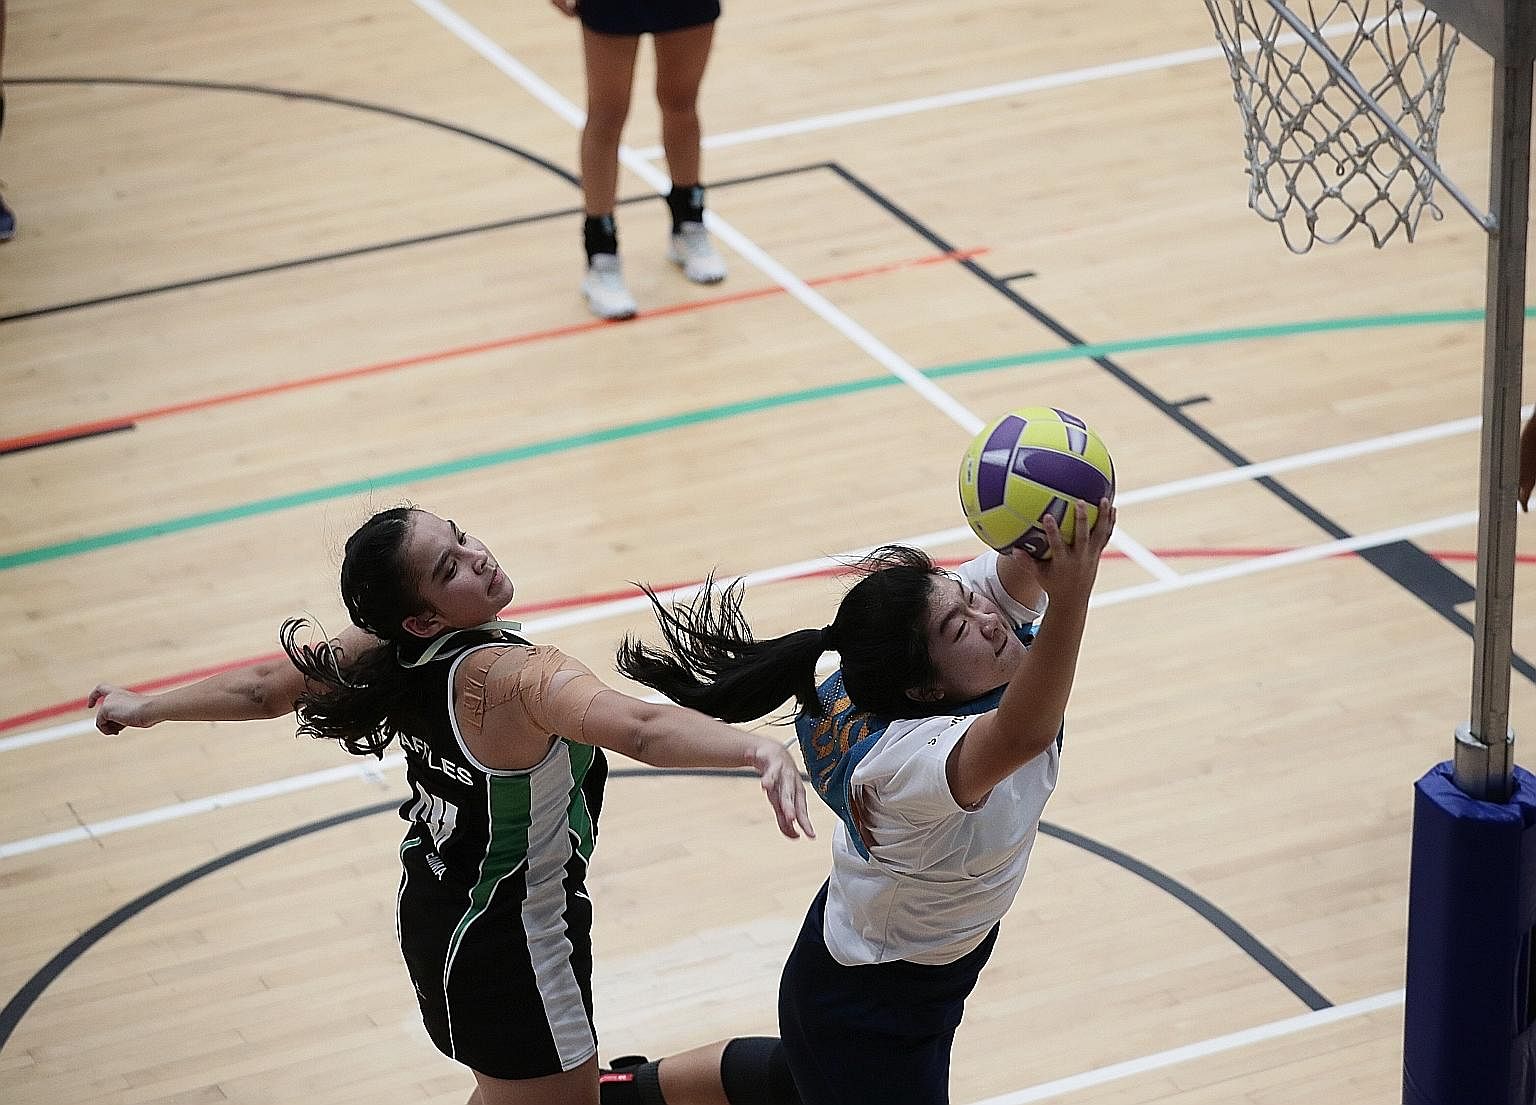 ACJC's Syntyche Yeo (right) scored 49 of her team's goals in the 53-35 win. ST PHOTO: KELVIN CHNG